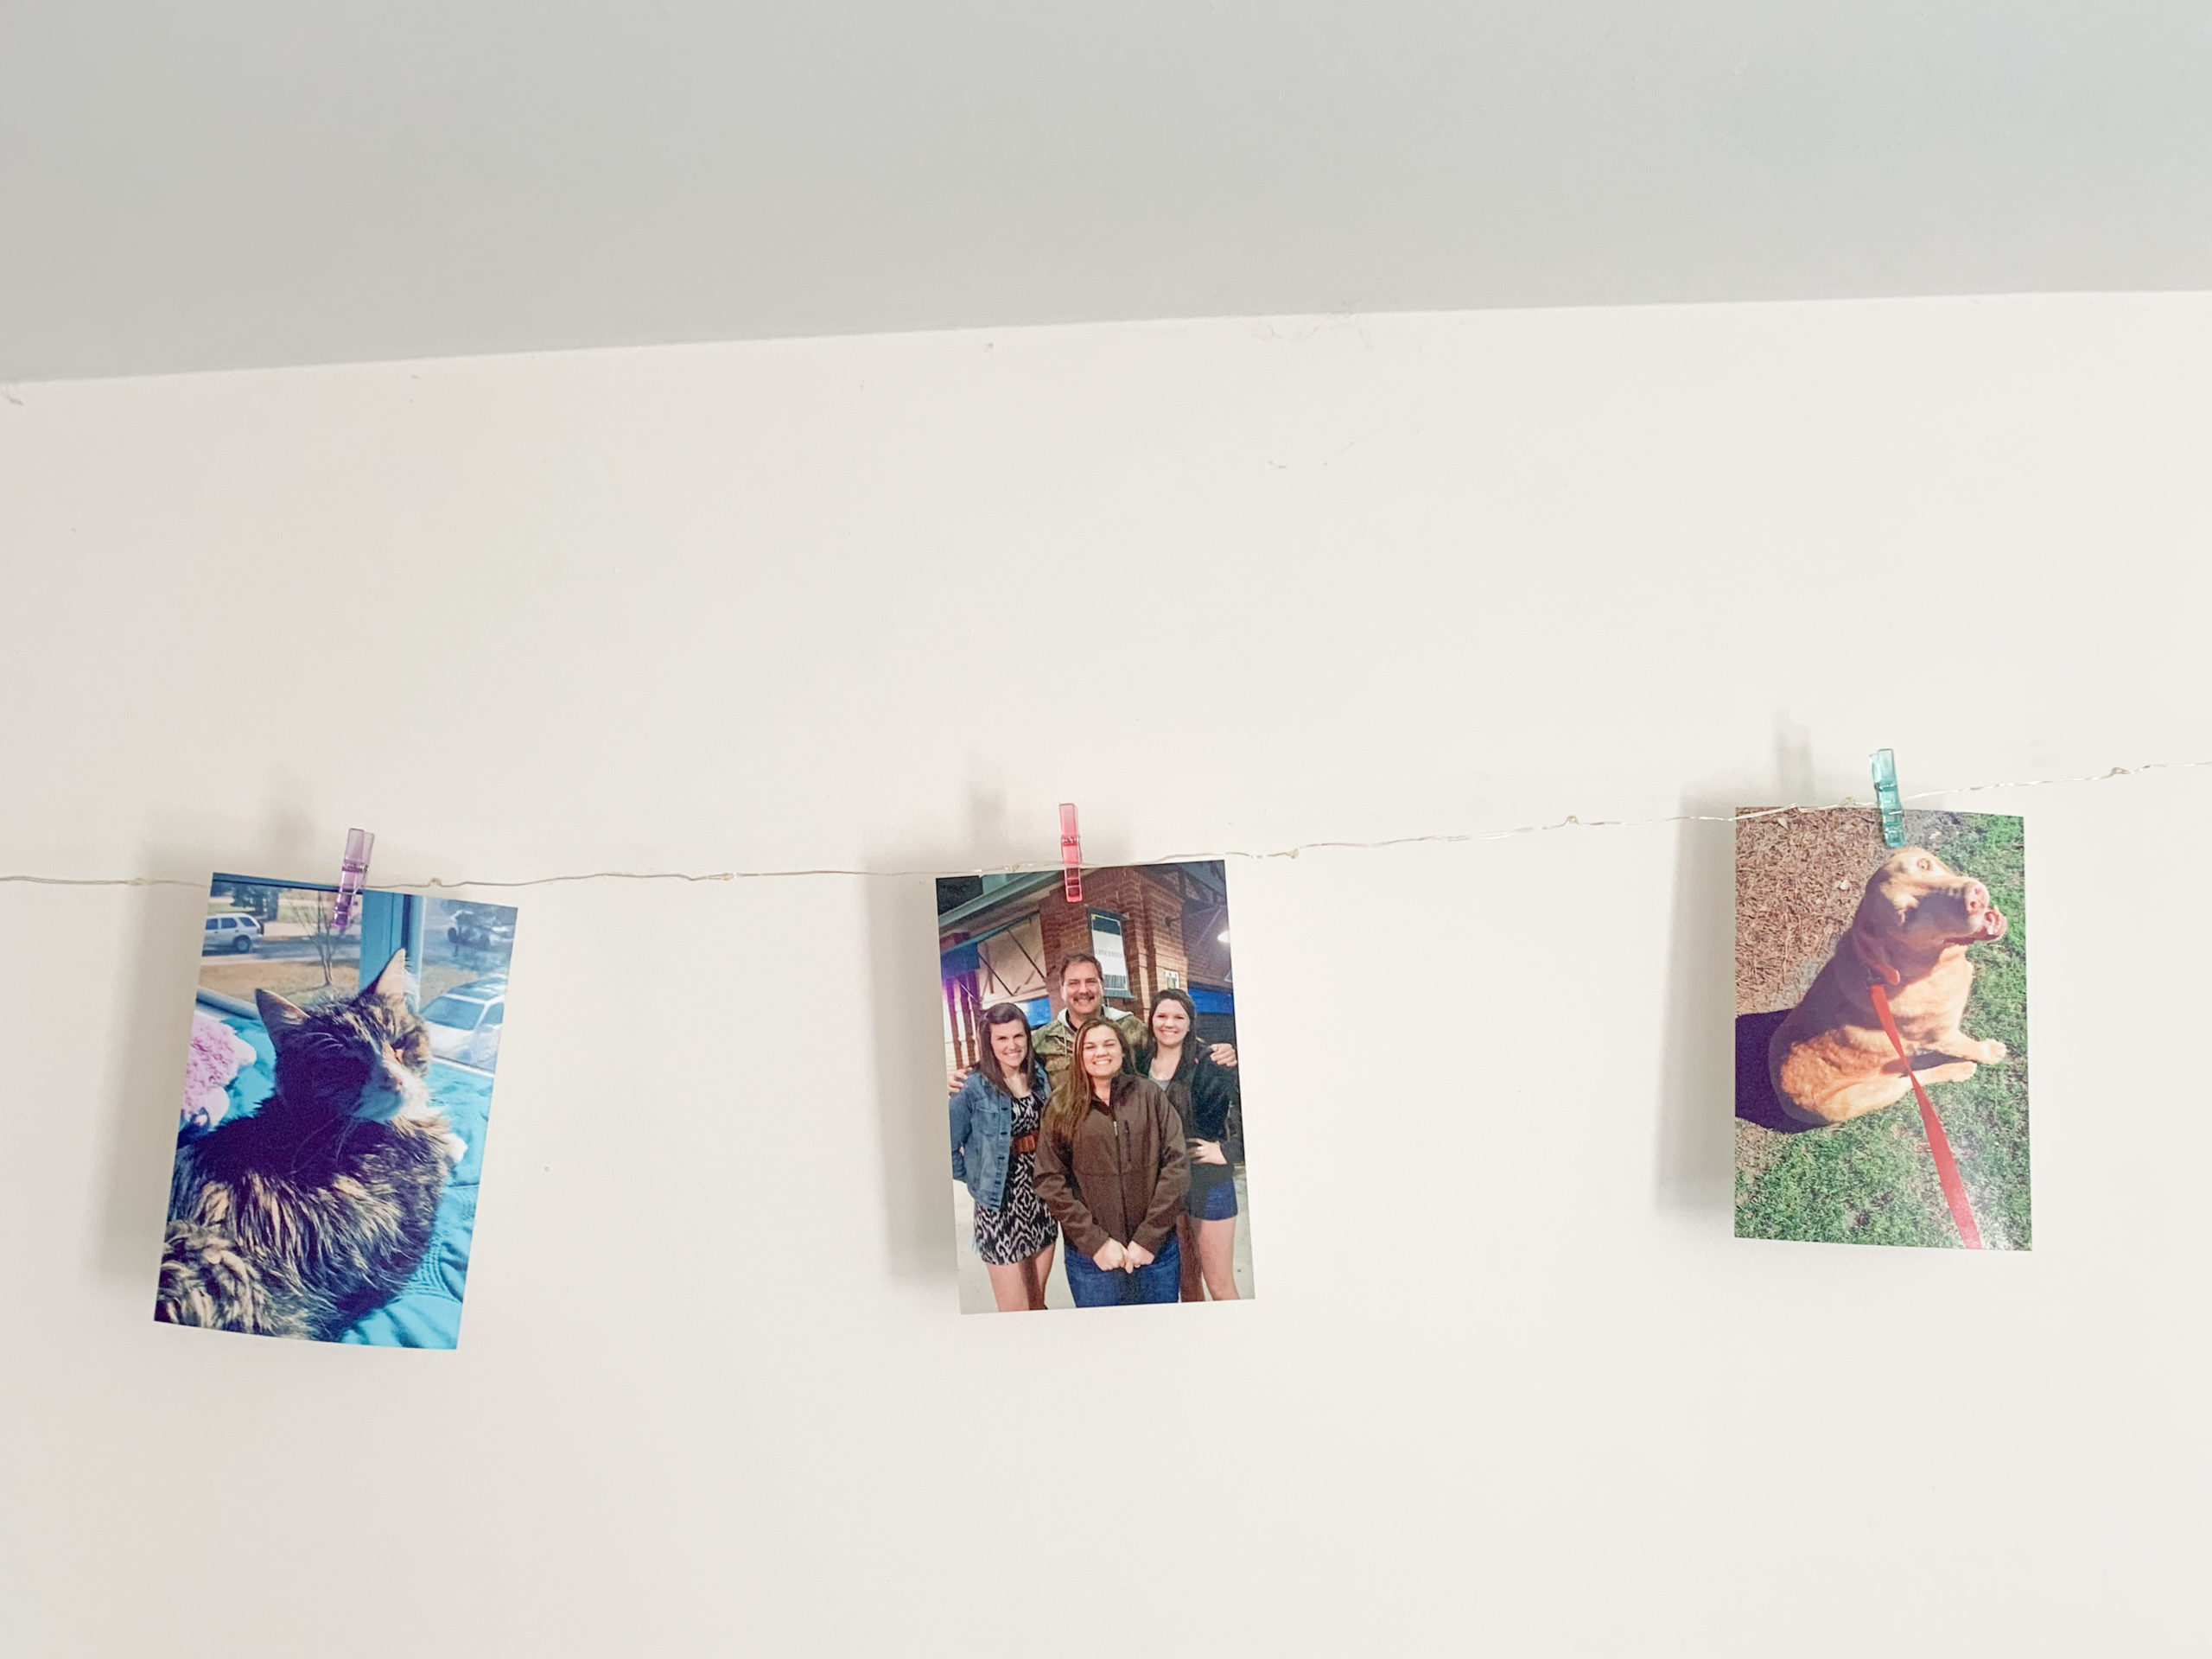 photos printed on the wall